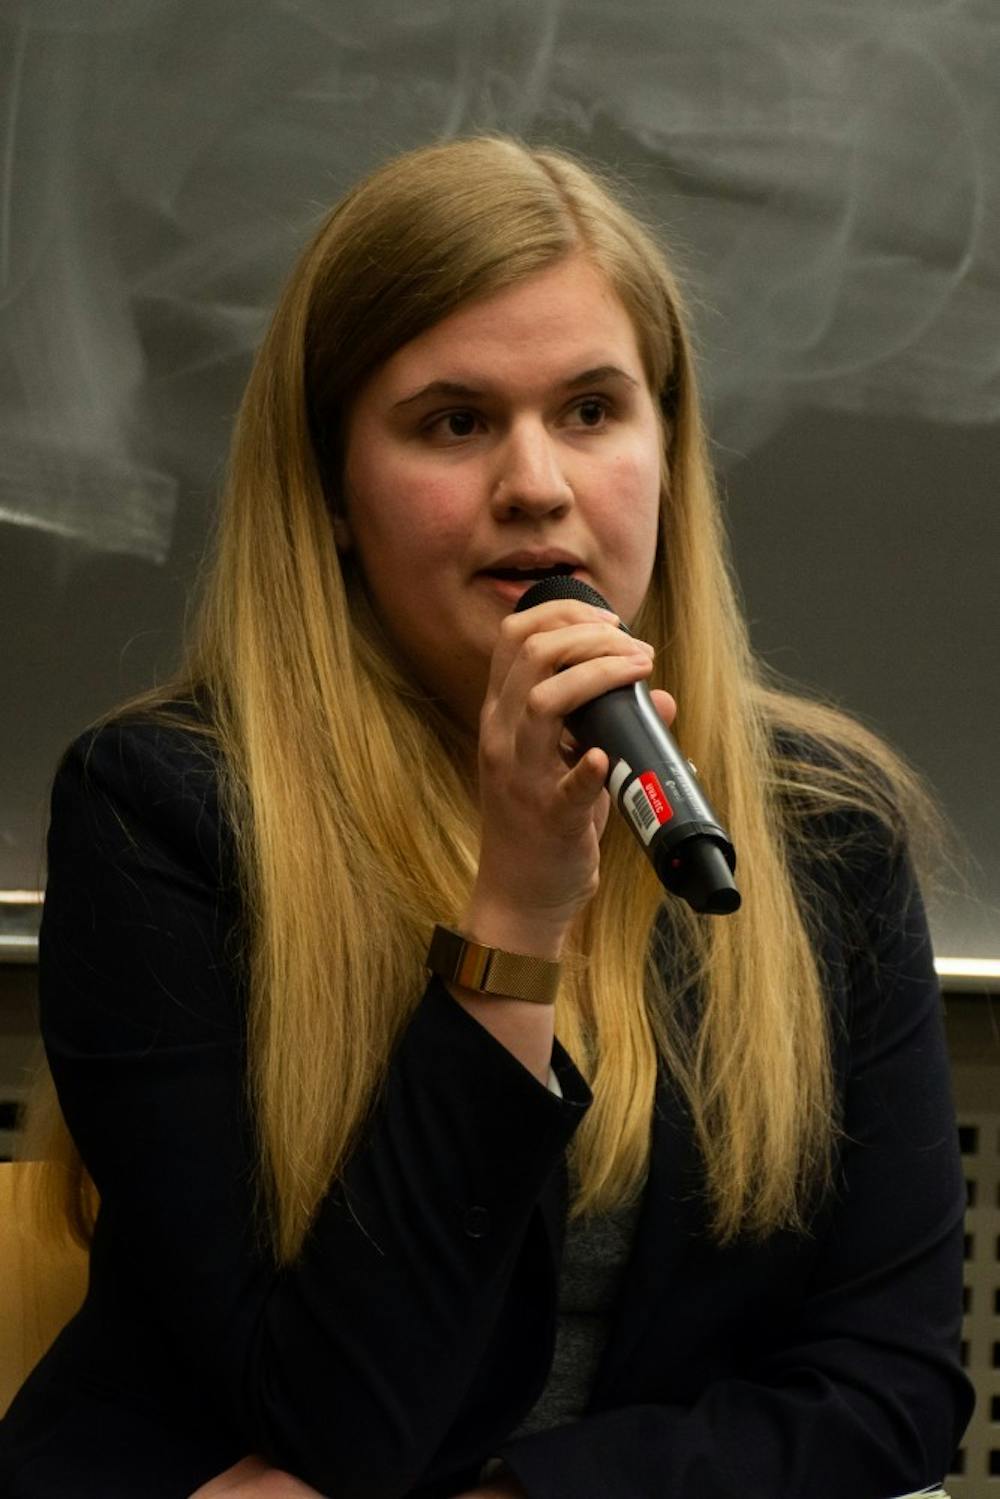 <p>Brasacchio has served on Student Council since her first year at the University and previously served as the chair of the Representative Body.</p>